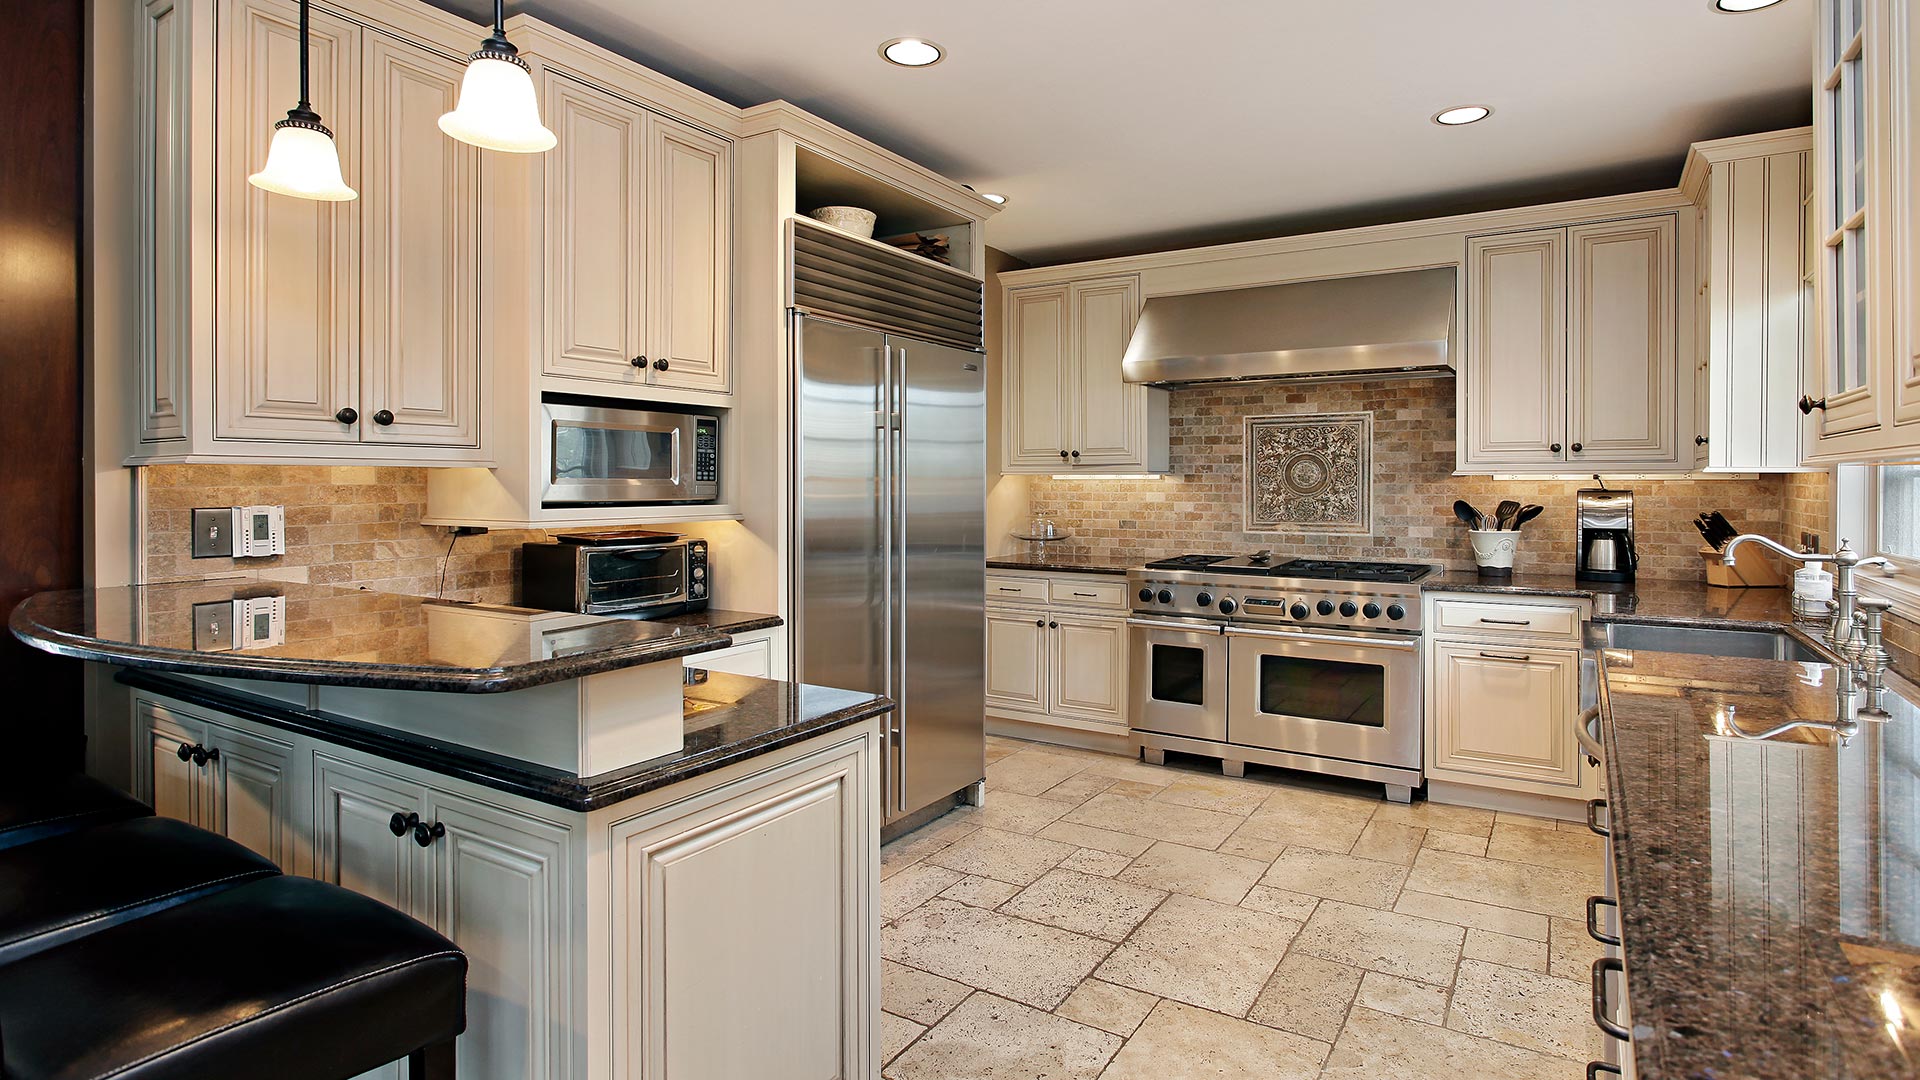 4 Trends in Cabinetry That You Will Want to Install